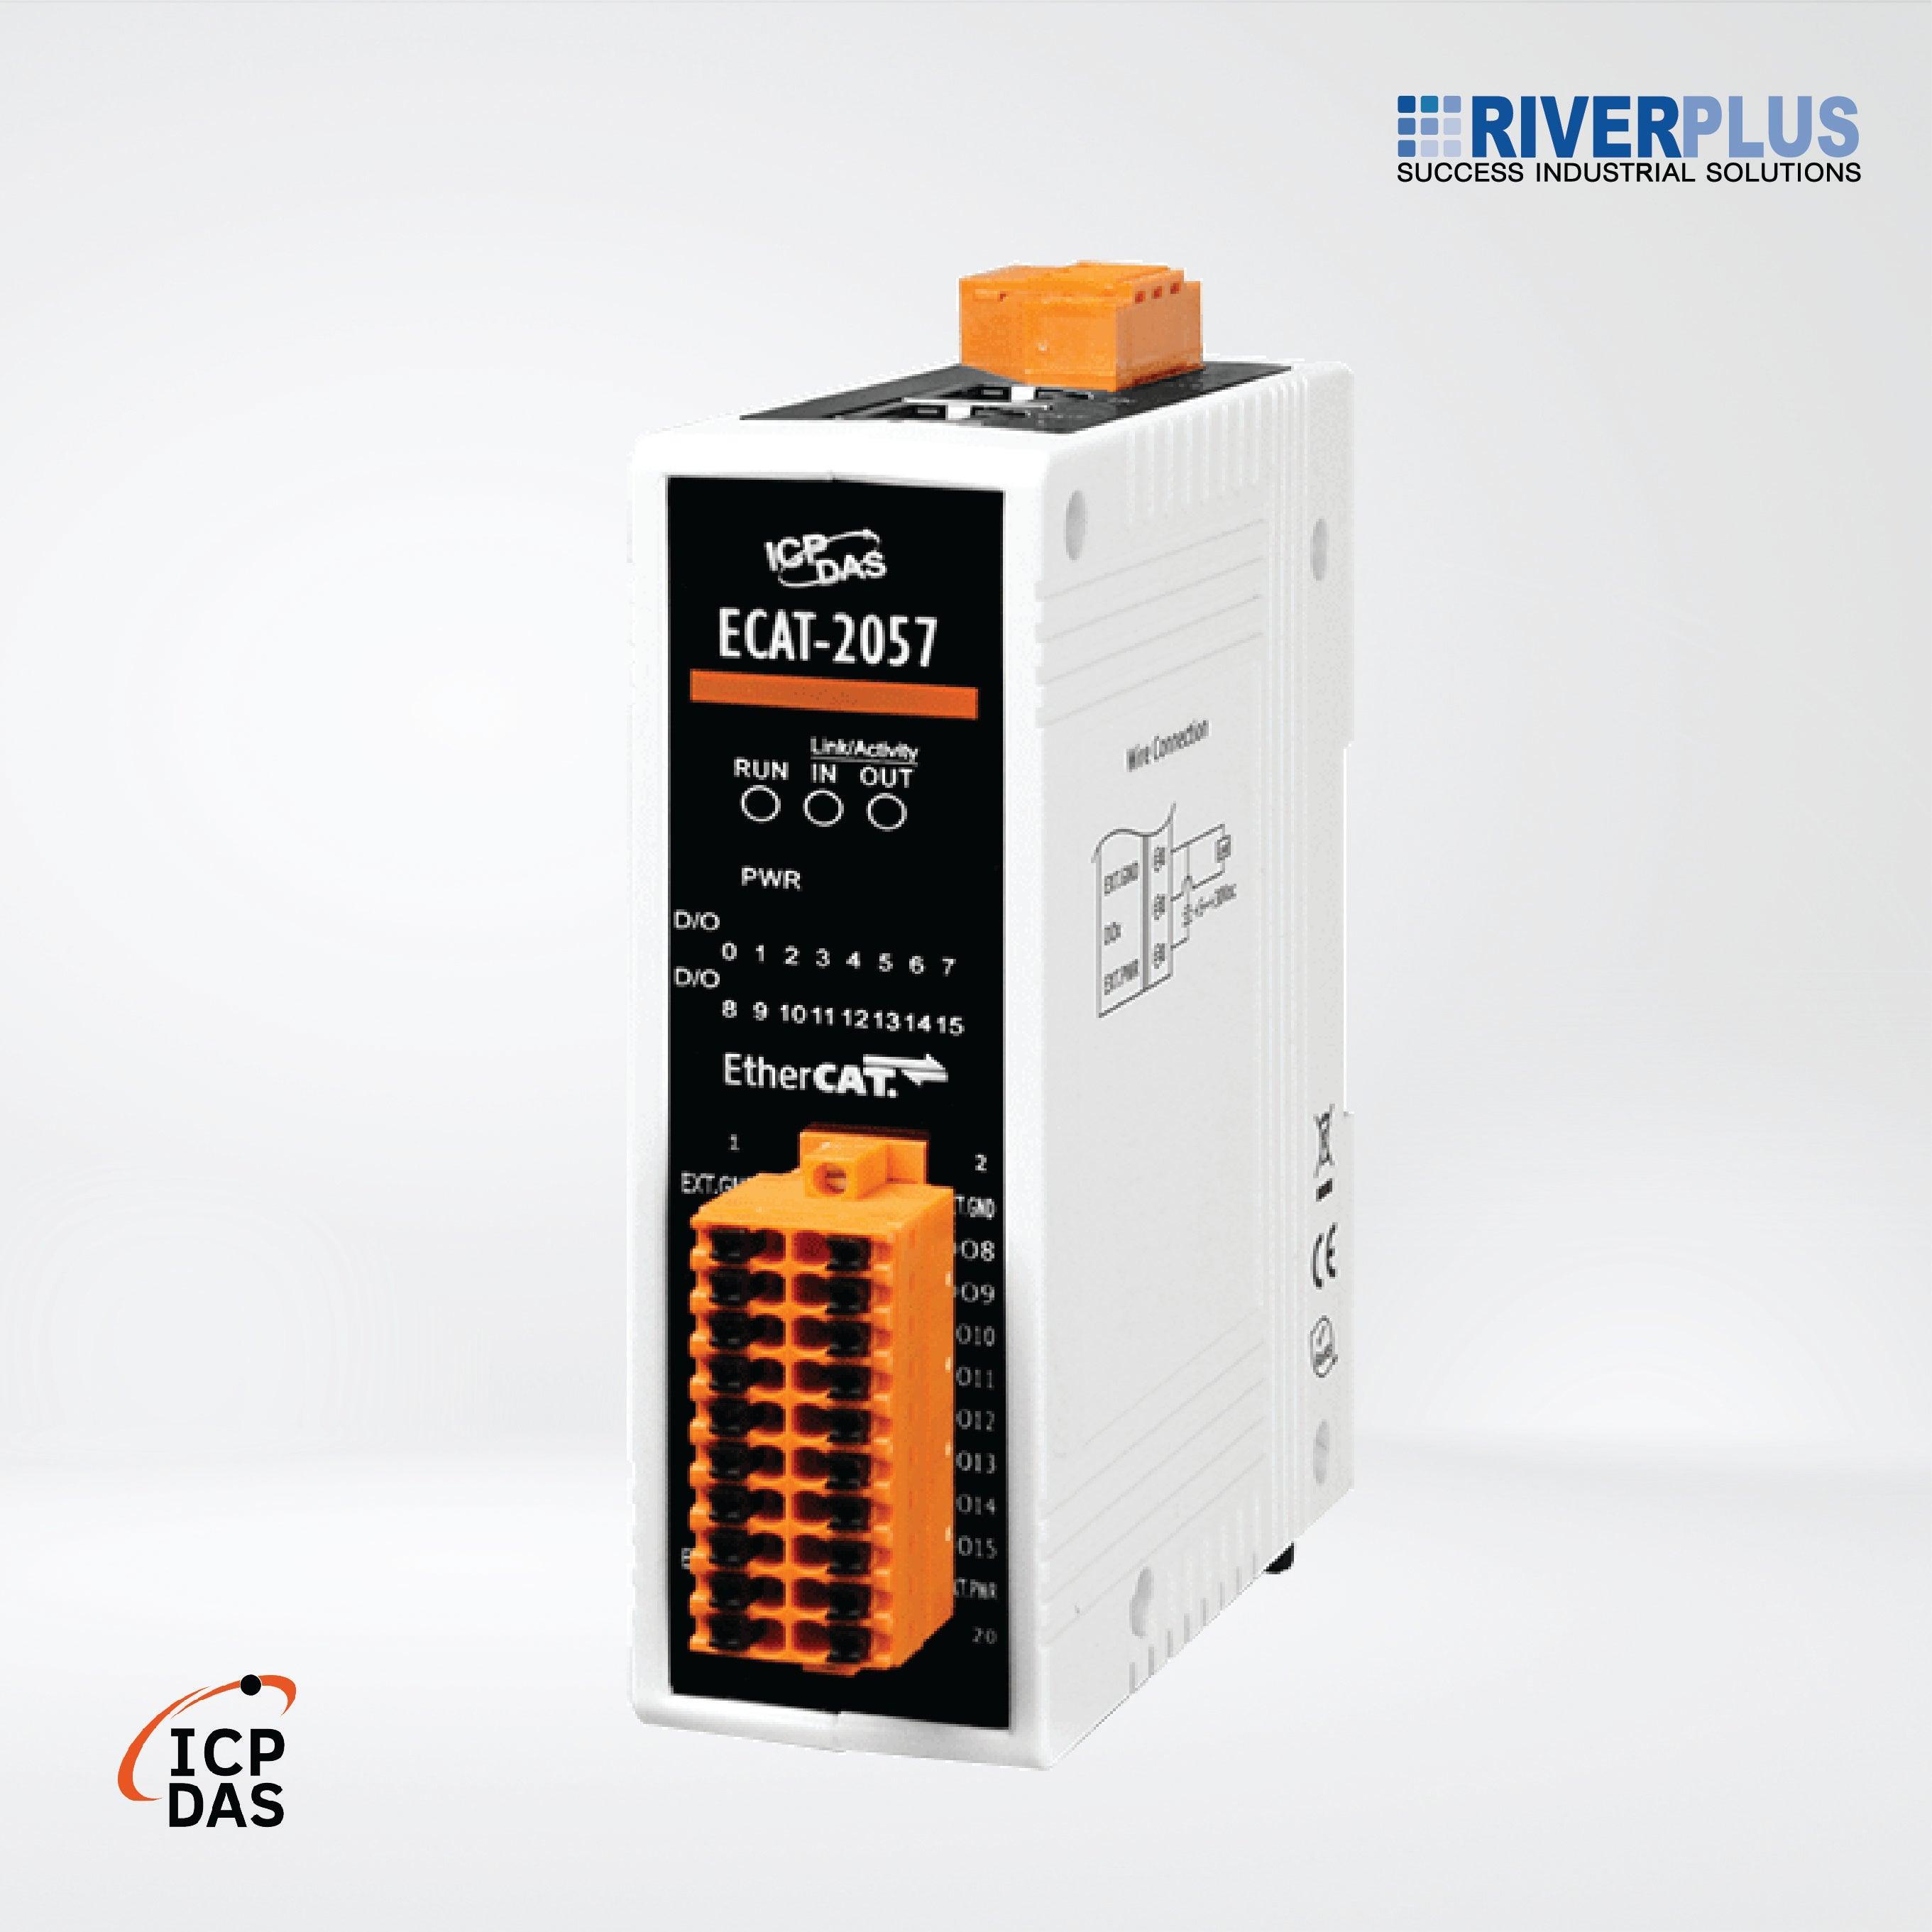 ECAT-2057 EtherCAT Slave I/O Module with Isolated 16-ch DO - Riverplus